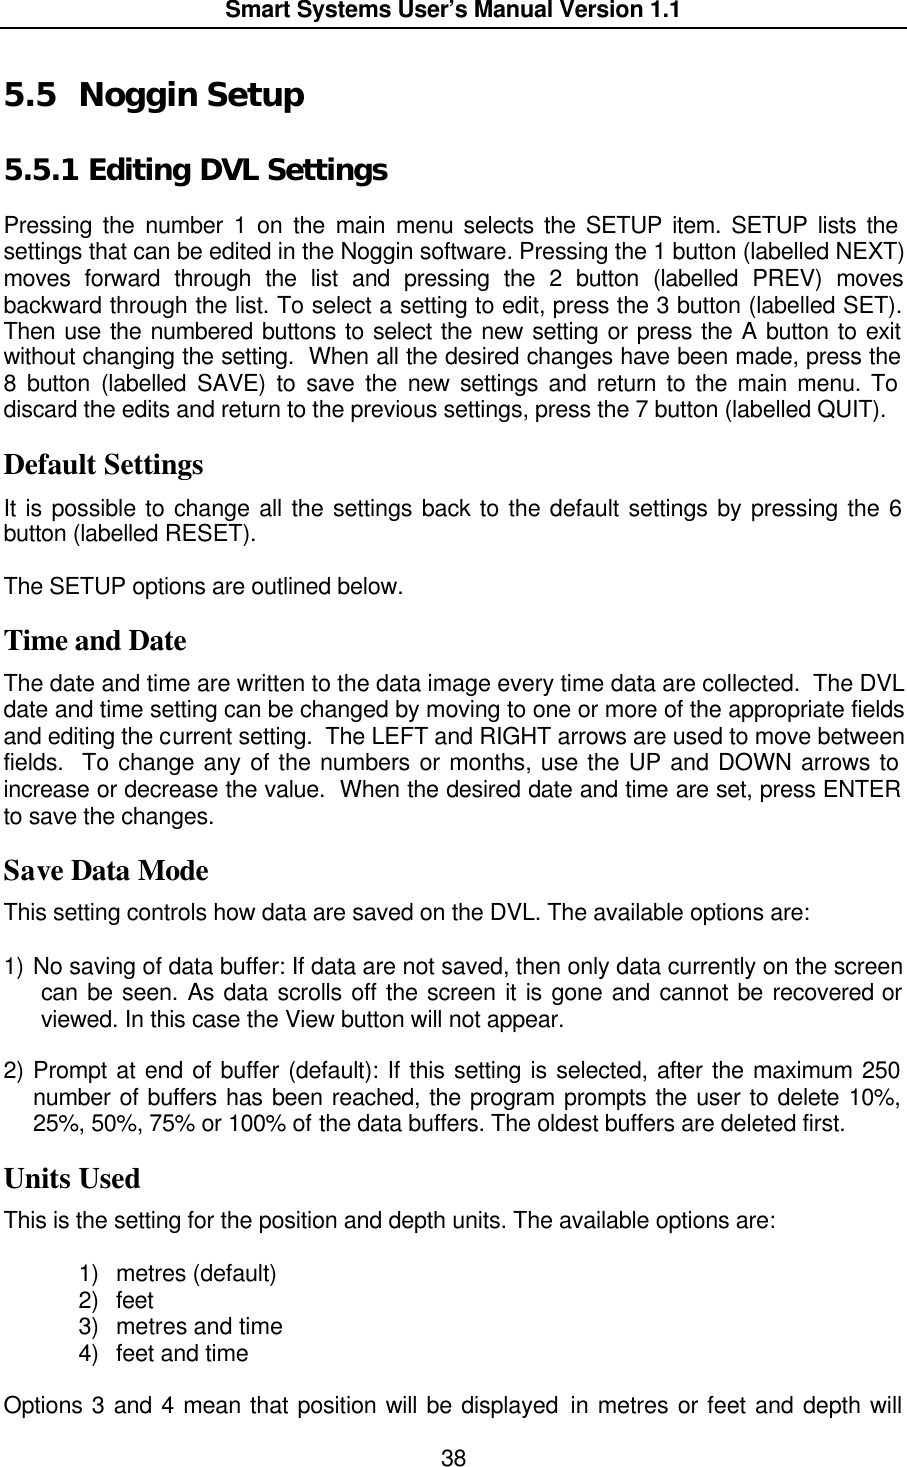  Smart Systems User’s Manual Version 1.1  38  5.5 Noggin Setup 5.5.1  Editing DVL Settings  Pressing the number 1 on the main menu selects the SETUP item. SETUP lists the settings that can be edited in the Noggin software. Pressing the 1 button (labelled NEXT) moves forward through the list and pressing the 2 button (labelled PREV) moves backward through the list. To select a setting to edit, press the 3 button (labelled SET). Then use the numbered buttons to select the new setting or press the A button to exit without changing the setting.  When all the desired changes have been made, press the 8 button (labelled SAVE) to save the new settings and return to the main menu. To discard the edits and return to the previous settings, press the 7 button (labelled QUIT).  Default Settings It is possible to change all the settings back to the default settings by pressing the 6 button (labelled RESET).  The SETUP options are outlined below. Time and Date The date and time are written to the data image every time data are collected.  The DVL date and time setting can be changed by moving to one or more of the appropriate fields and editing the current setting.  The LEFT and RIGHT arrows are used to move between fields.  To change any of the numbers or months, use the UP and DOWN arrows to increase or decrease the value.  When the desired date and time are set, press ENTER to save the changes.  Save Data Mode This setting controls how data are saved on the DVL. The available options are:  1) No saving of data buffer: If data are not saved, then only data currently on the screen can be seen. As data scrolls off the screen it is gone and cannot be recovered or viewed. In this case the View button will not appear.  2) Prompt at end of buffer (default): If this setting is selected, after the maximum 250 number of buffers has been reached, the program prompts the user to delete 10%, 25%, 50%, 75% or 100% of the data buffers. The oldest buffers are deleted first. Units Used This is the setting for the position and depth units. The available options are:   1) metres (default) 2) feet 3) metres and time 4) feet and time Options 3 and 4 mean that position will be displayed in metres or feet and depth will 